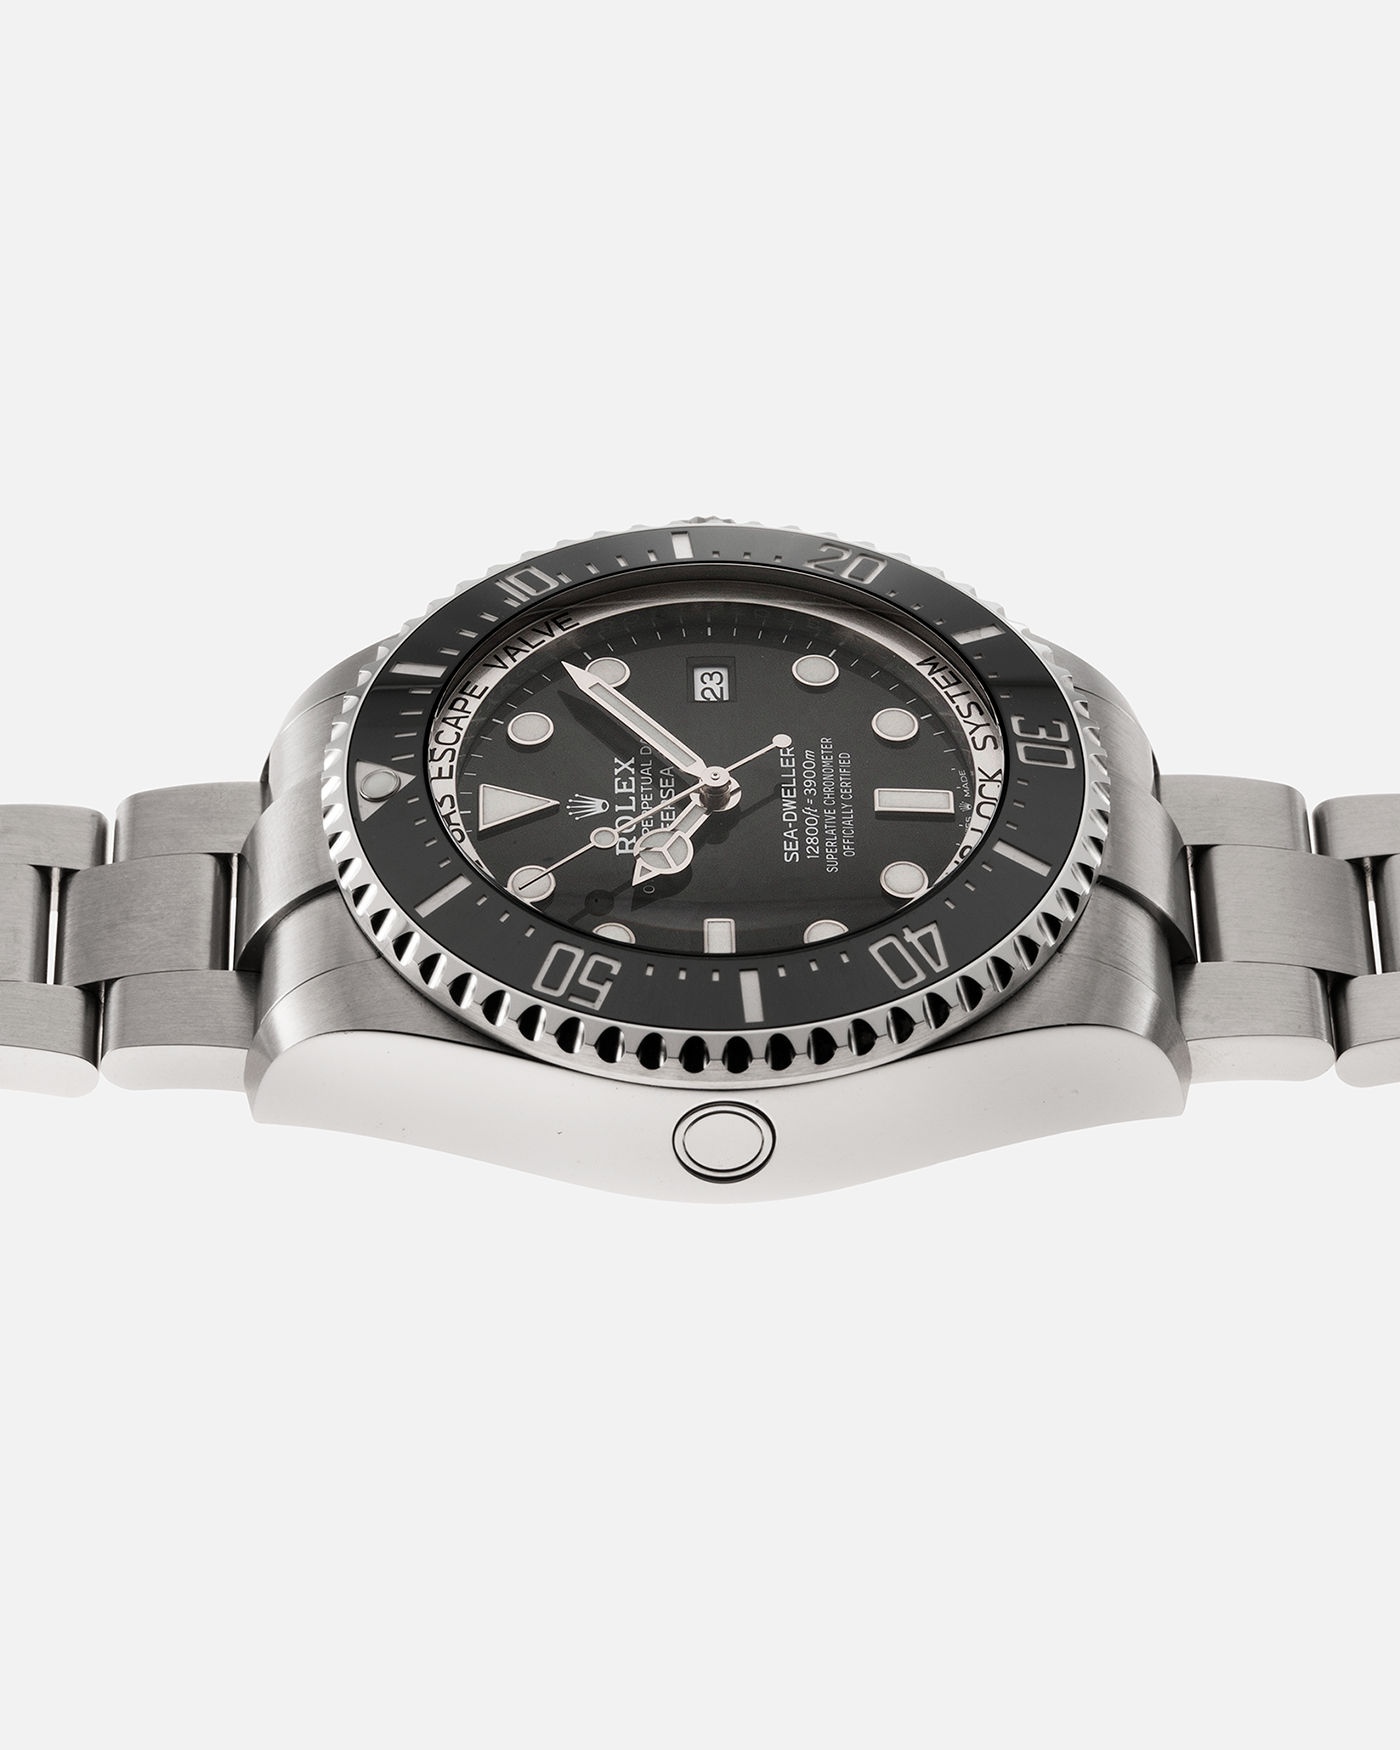 Brand: Rolex Year: 2018 Model: Deepsea Sea Dweller Reference Number: 126660 Material: Stainless Steel Movement: Rolex Cal. 3235, Self-Winding Case Diameter: 44mm Bracelet / Strap: Rolex 904L Steel Oyster Bracelet with Fliplock and Glidelock Extension System 